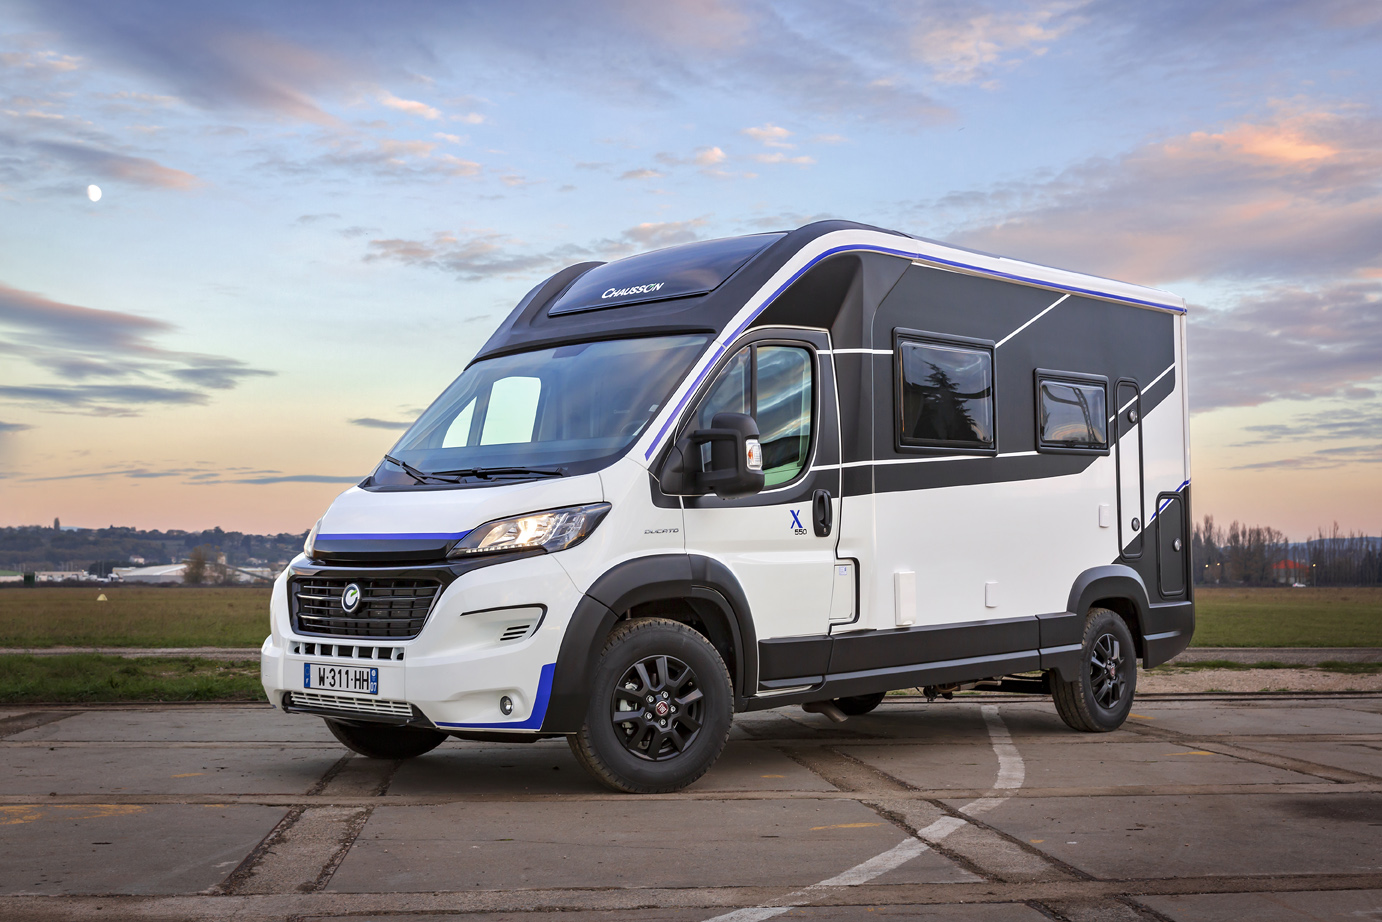 The new Chausson COMBO X550 - a perfect fusion? – main image